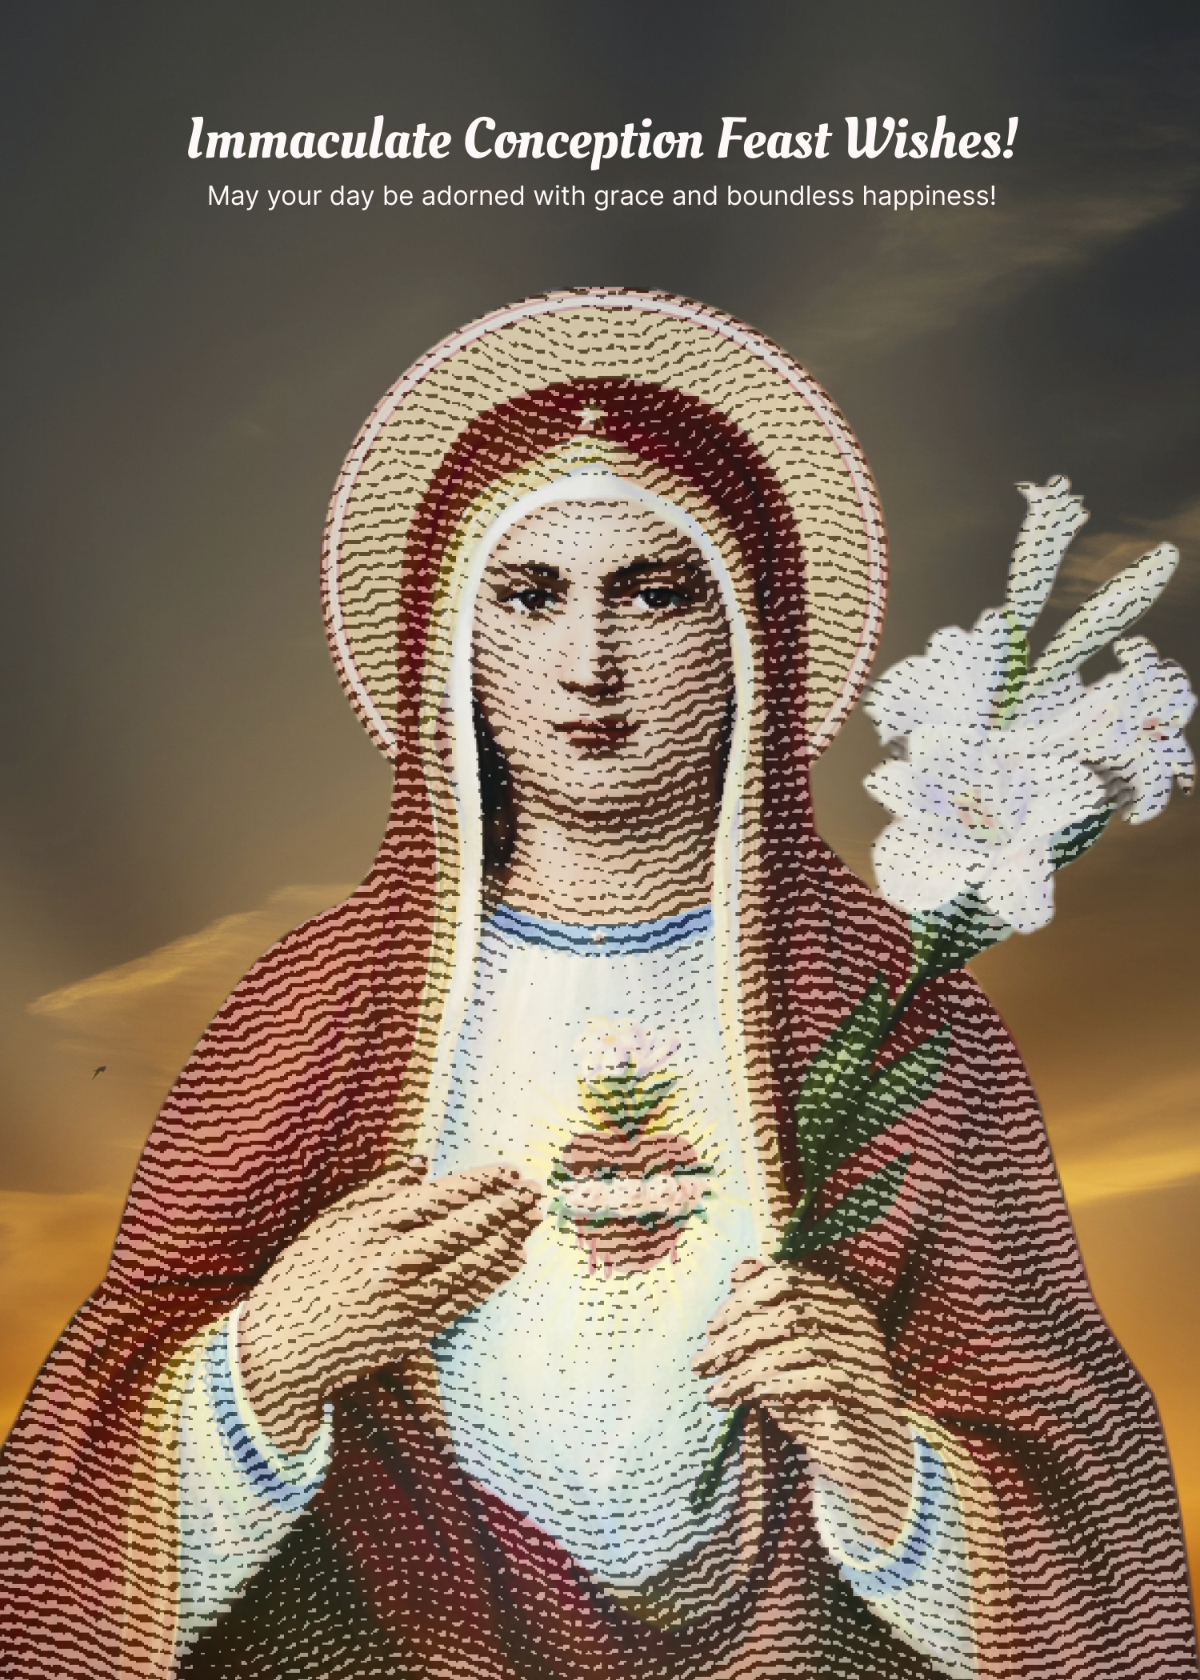 Free Feast of the Immaculate Conception Wishes Template